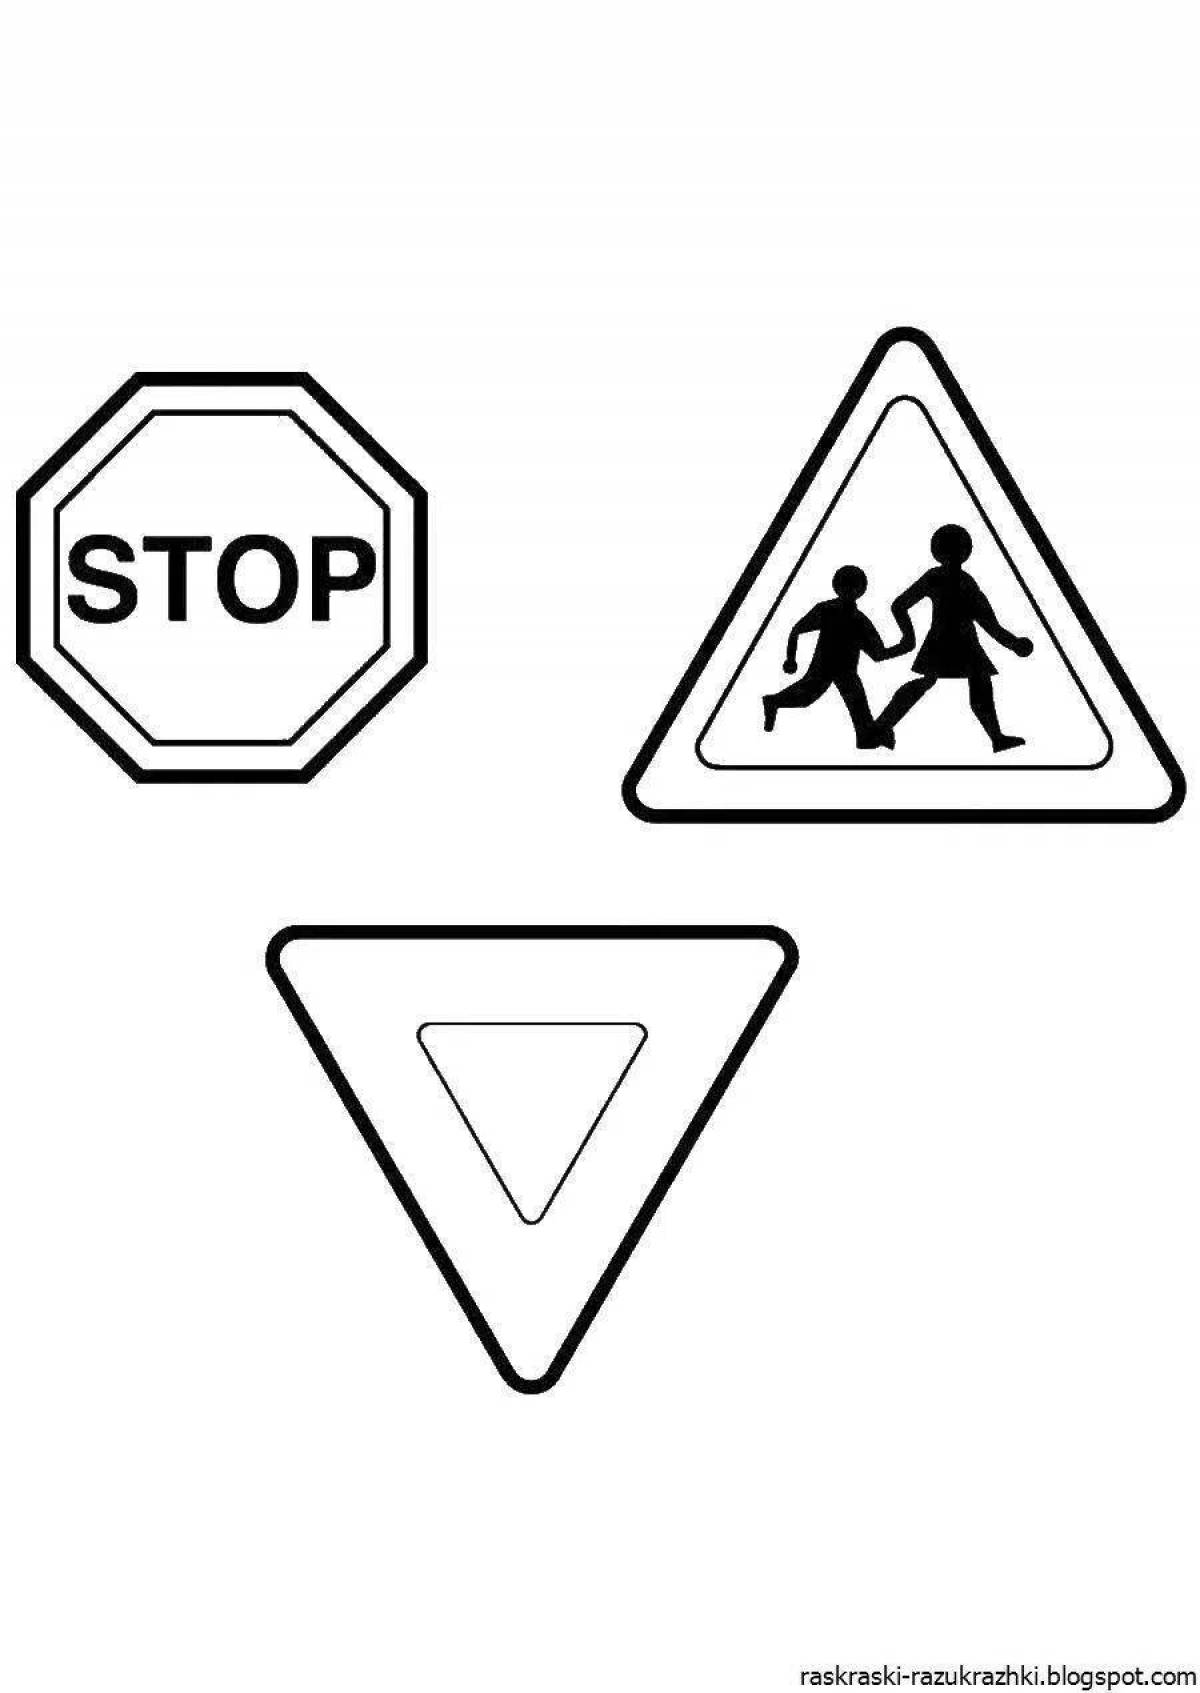 Adorable warning signs coloring page